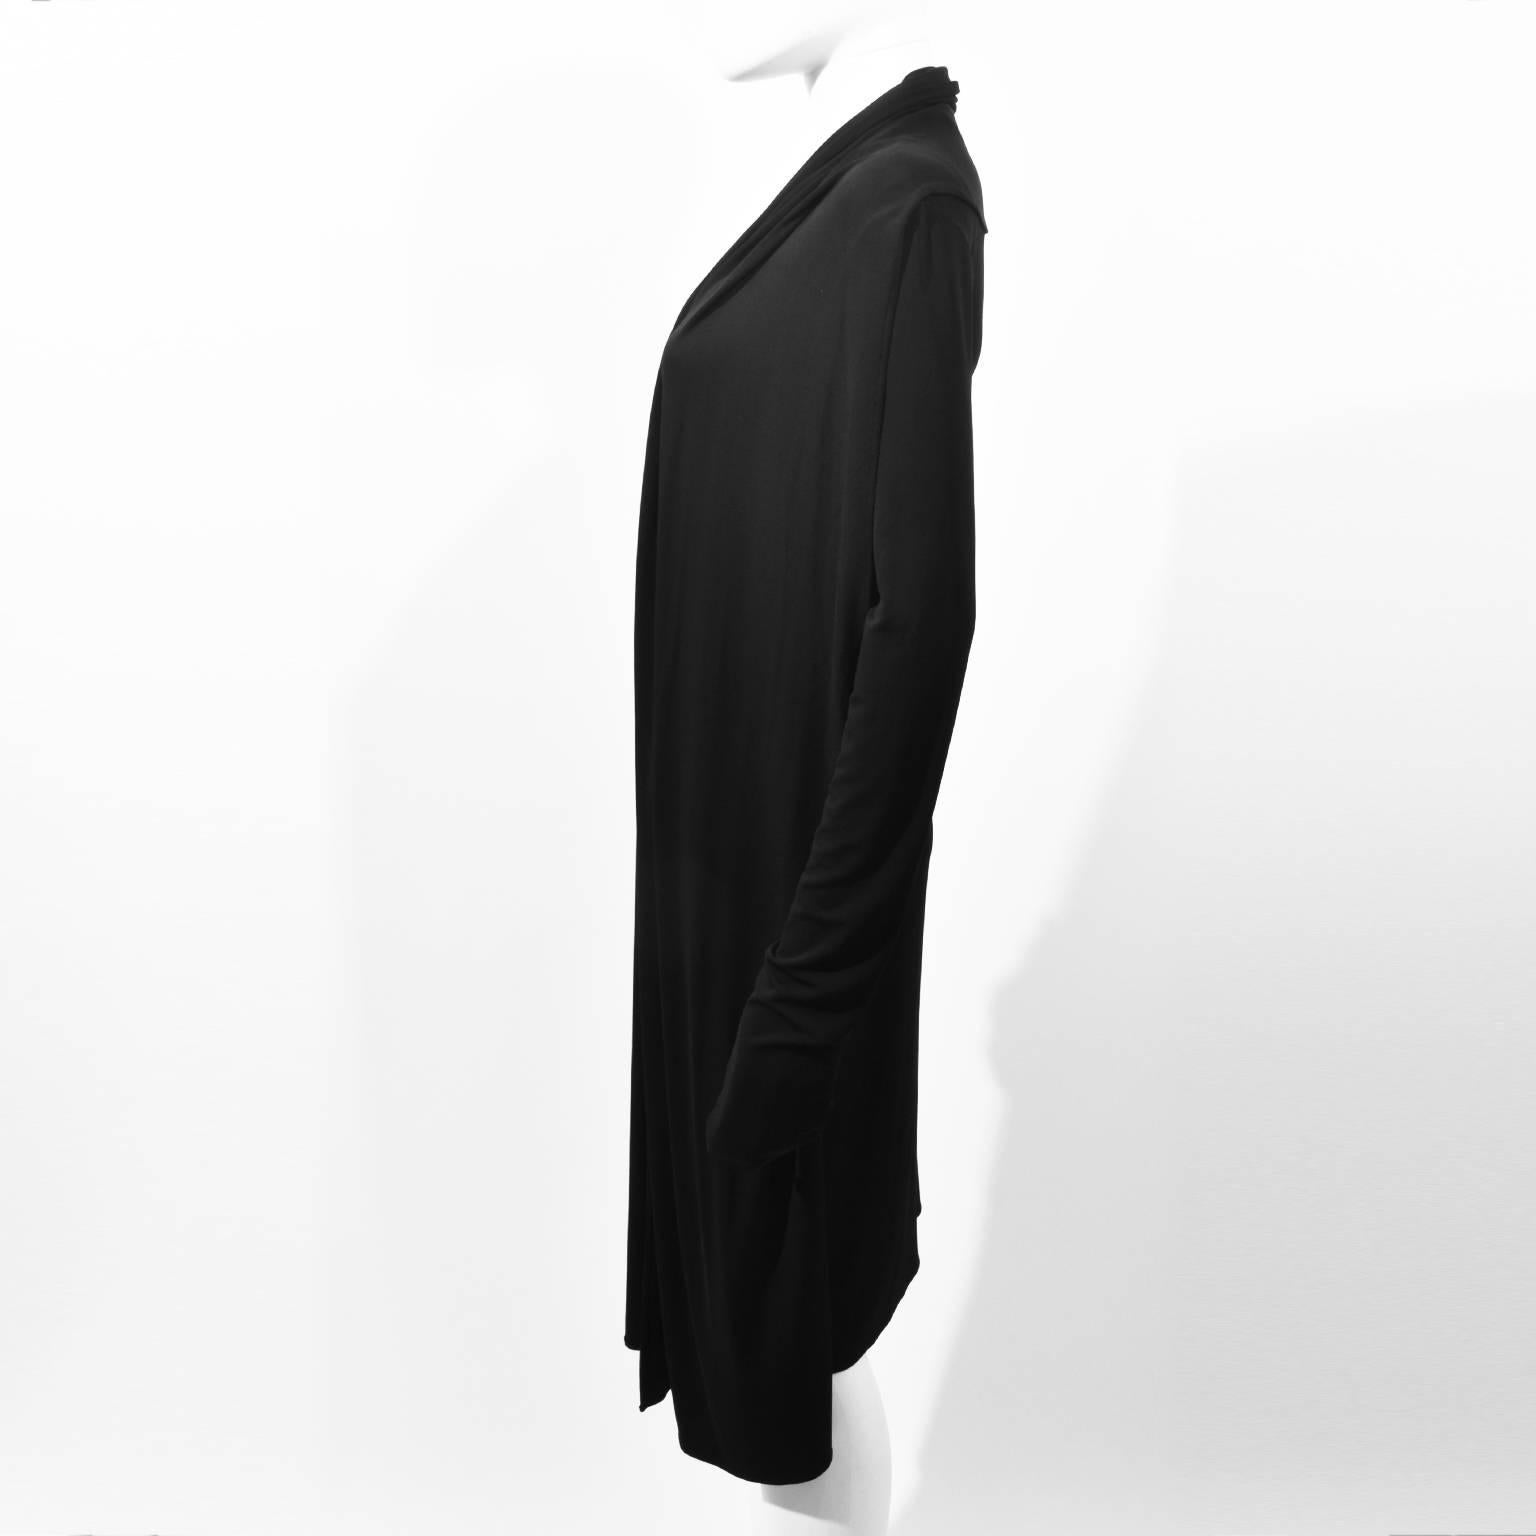 Maison Martin Margiela Black Viscose Dress with Attached Waistcoat  In Excellent Condition For Sale In London, GB